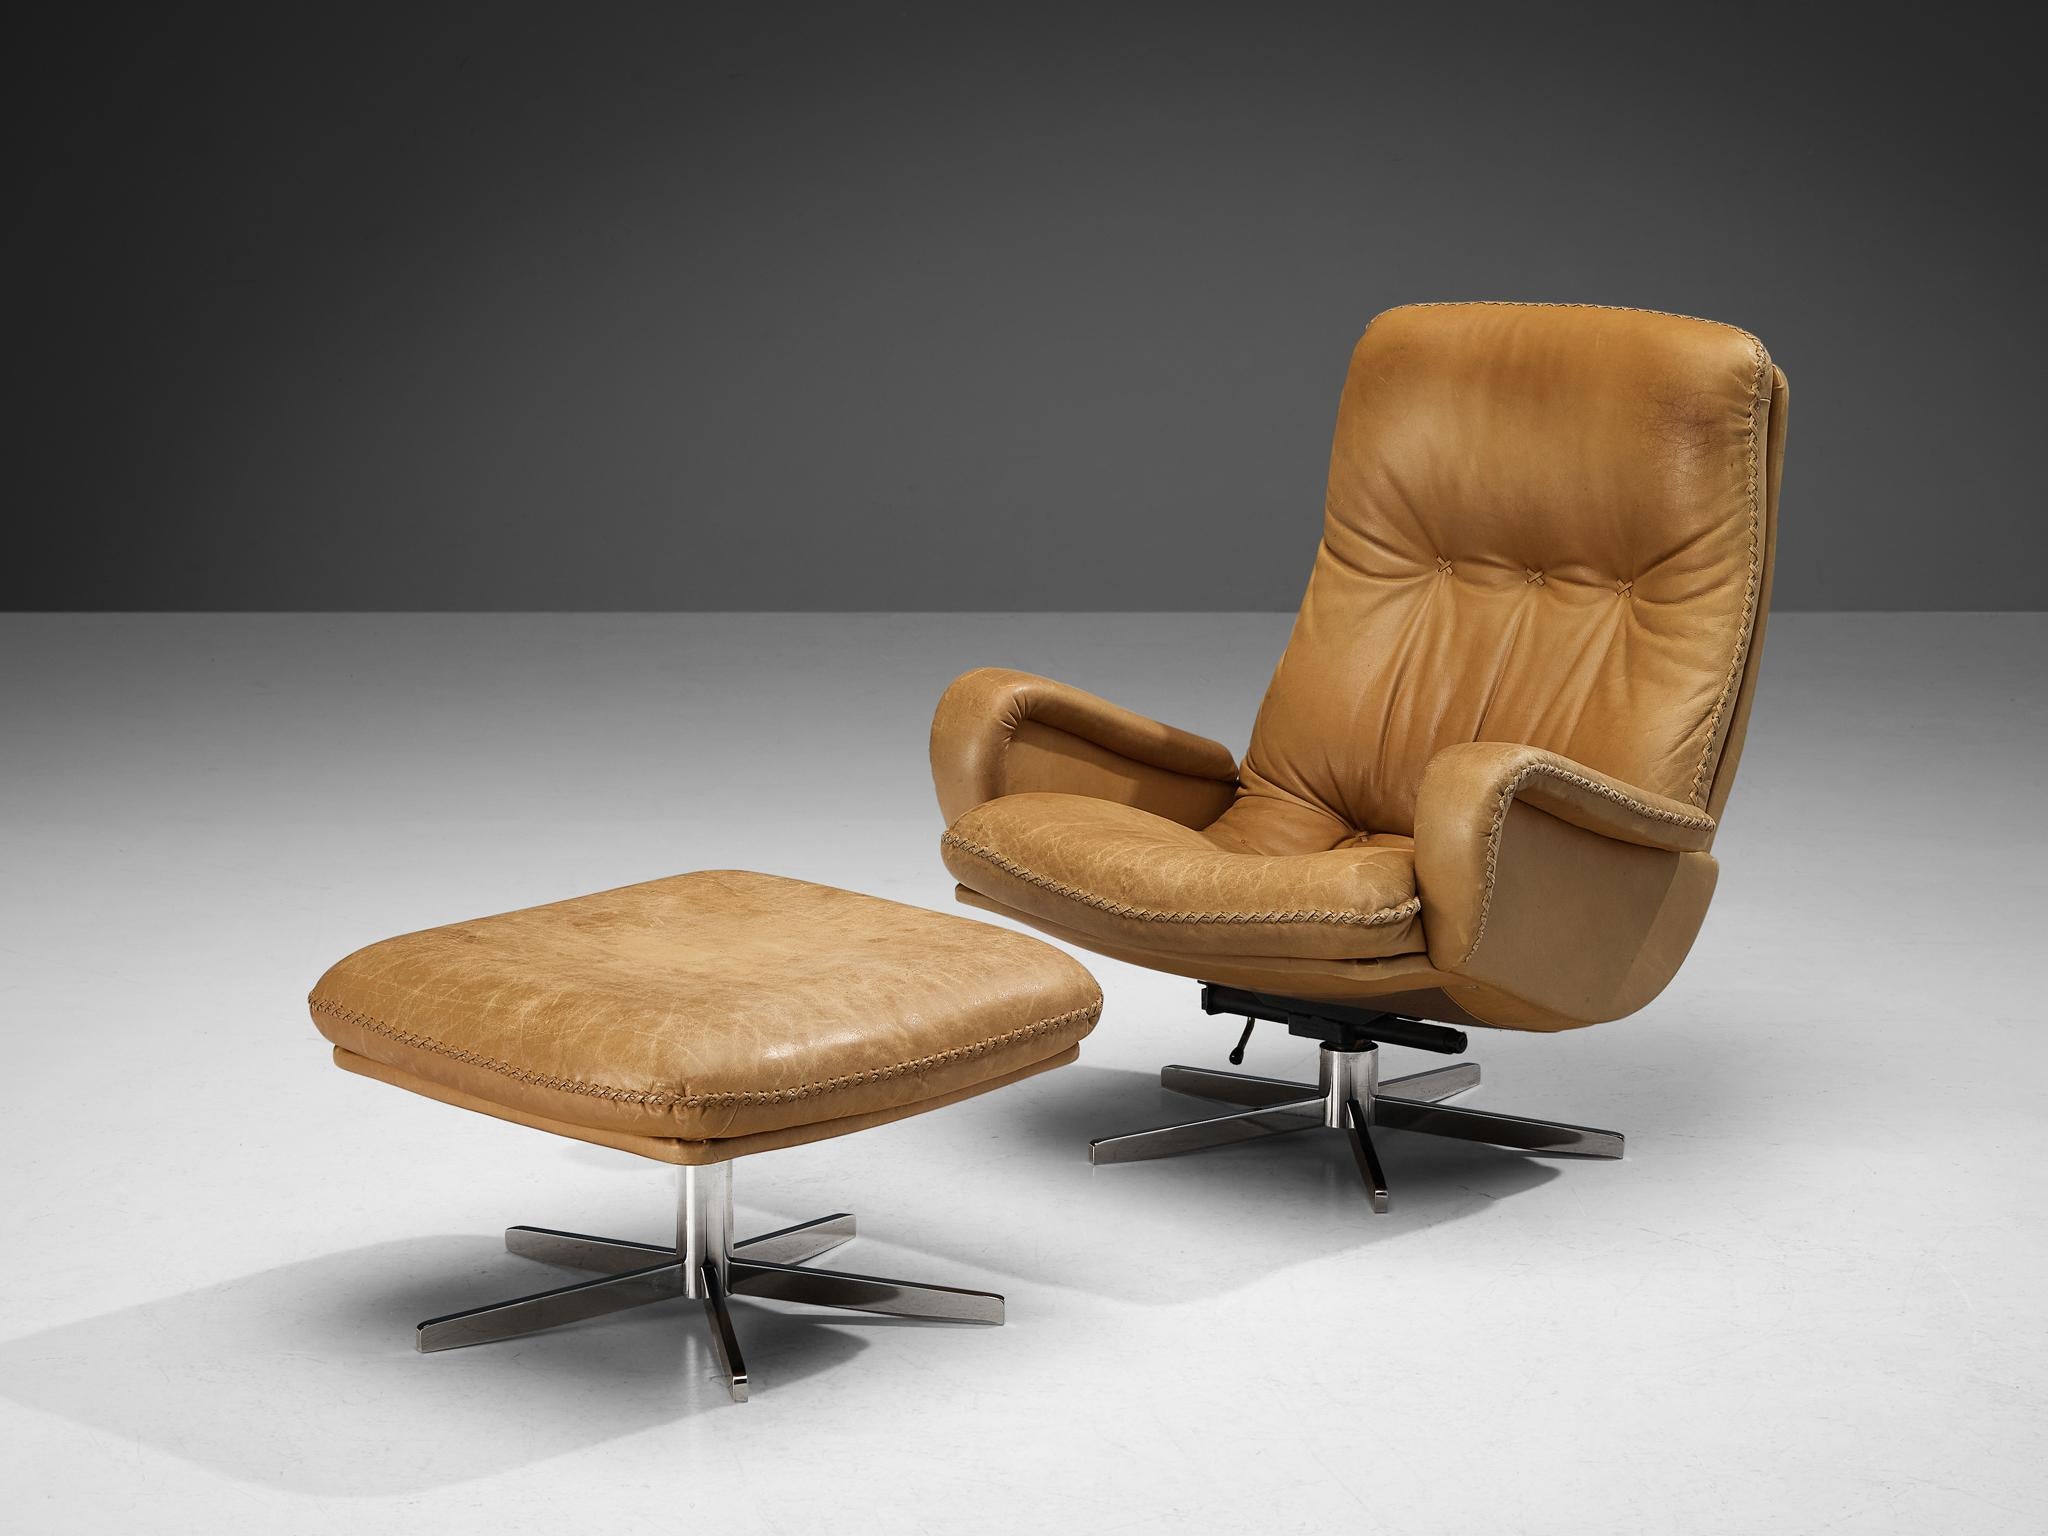 De Sede, set of lounge chair and ottoman model 'S231', patinated leather, chromed metal, Switzerland, 1960s 

This lovely chair by De Sede is based on a solid construction featuring a large backrest and deep seat which offers great comfort to the